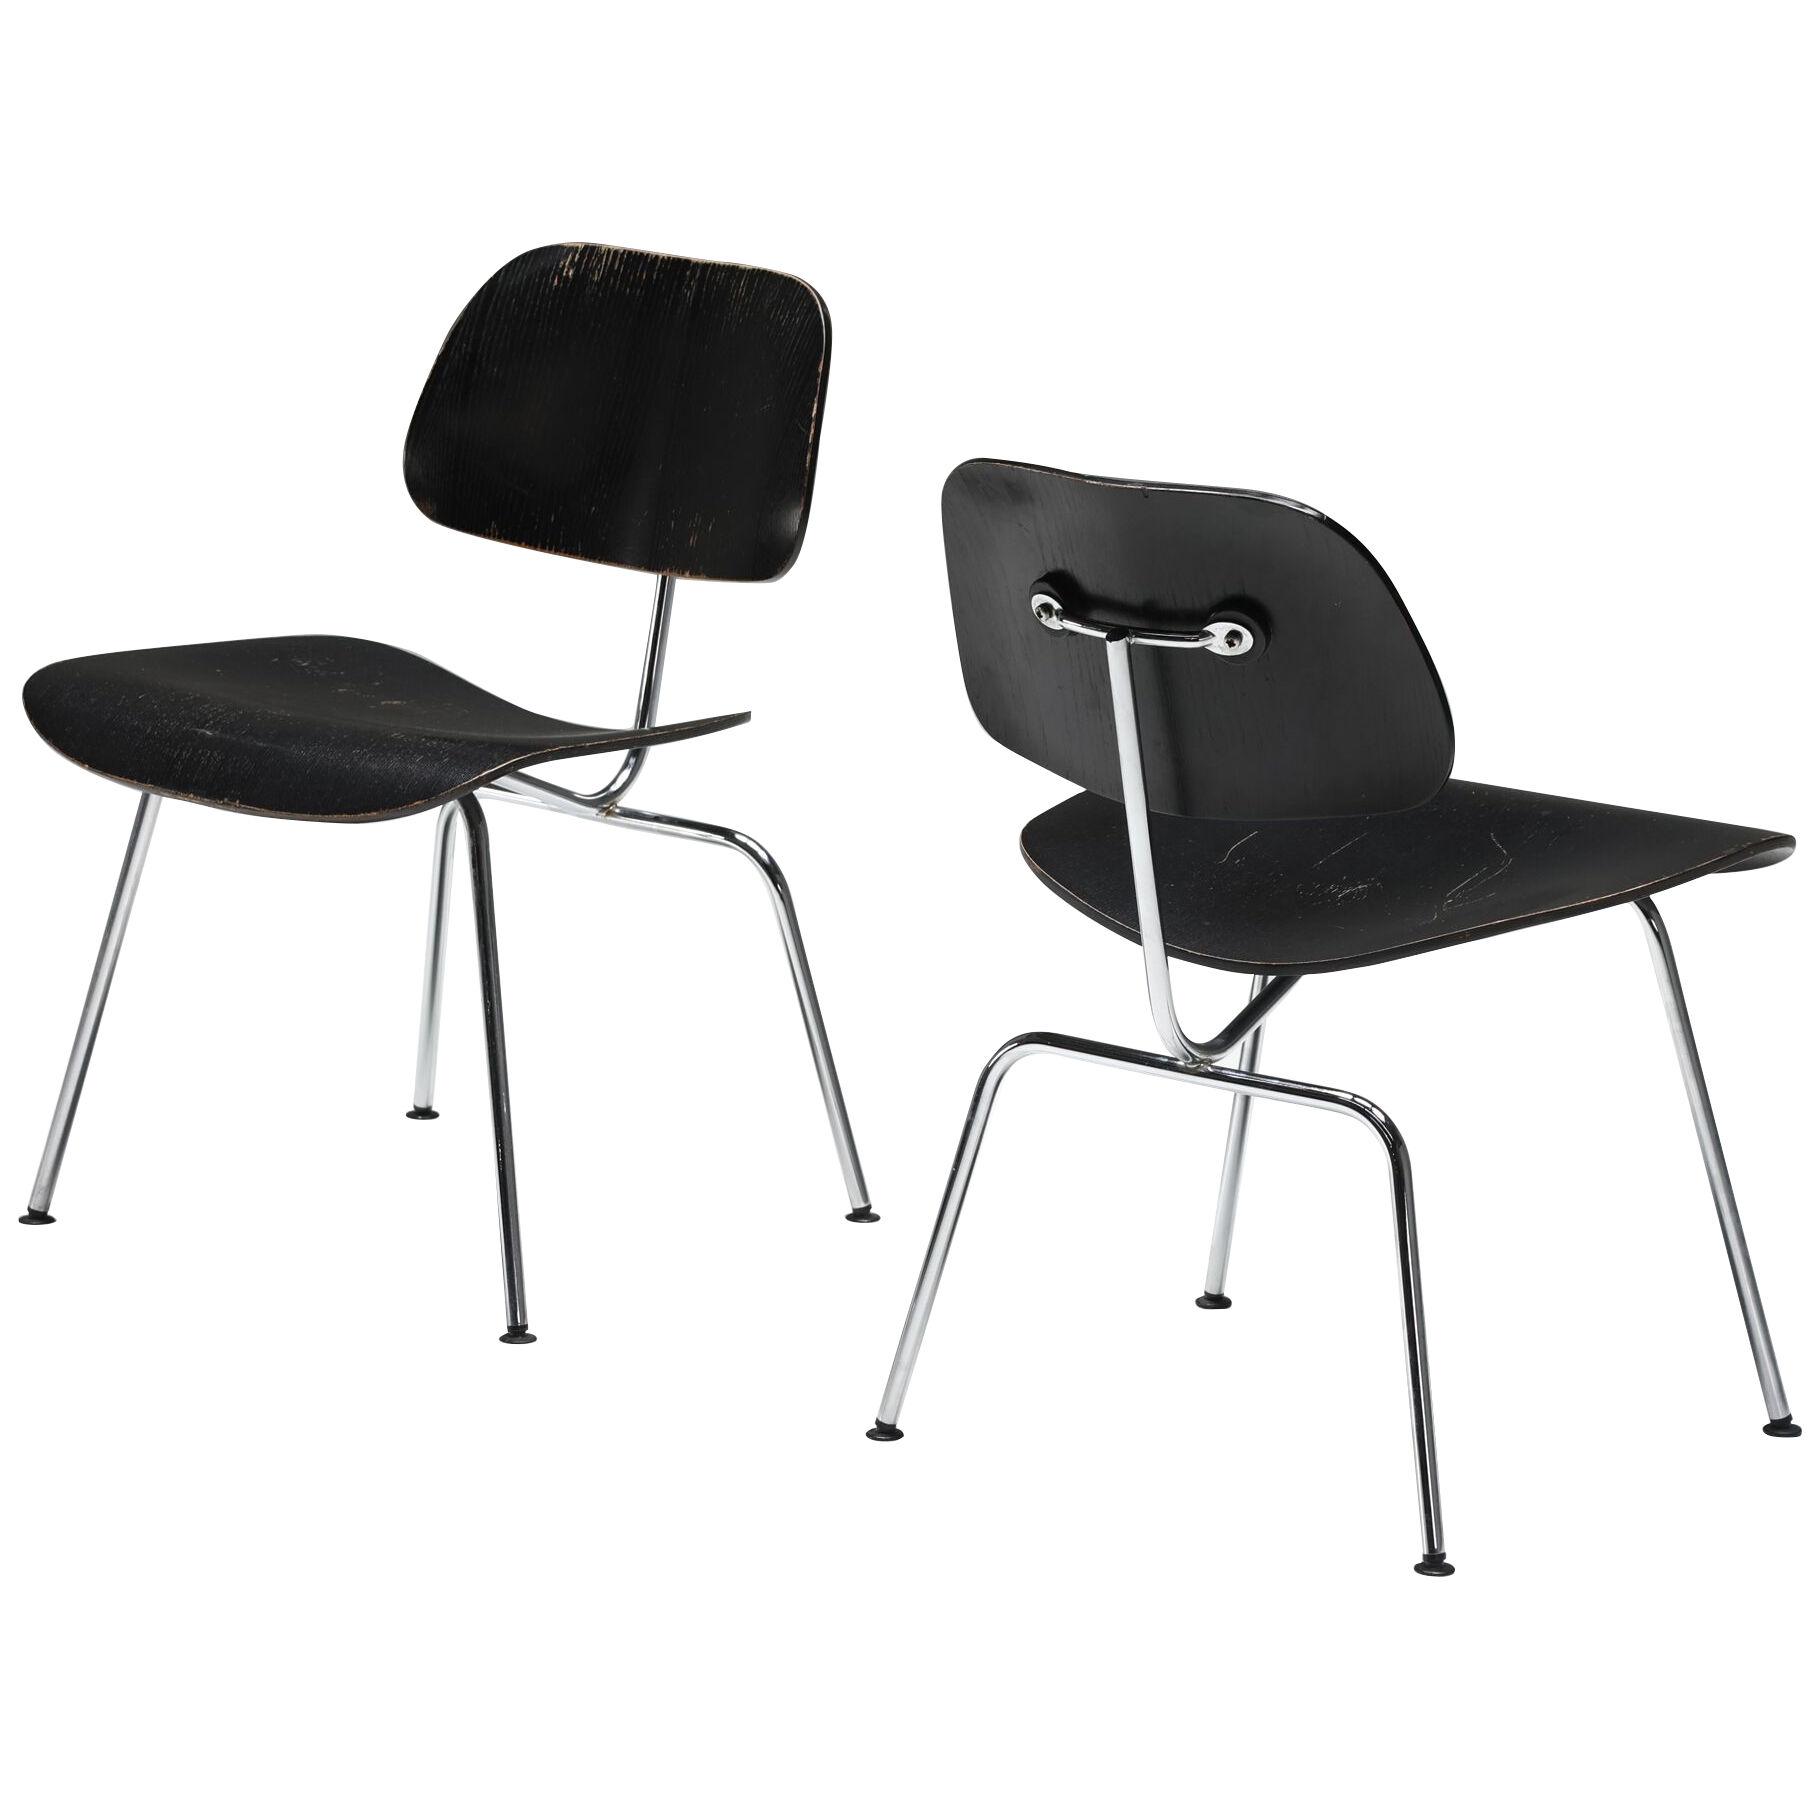 Charles and Ray Eames ‘DCM’ Set for Vitra - 1999